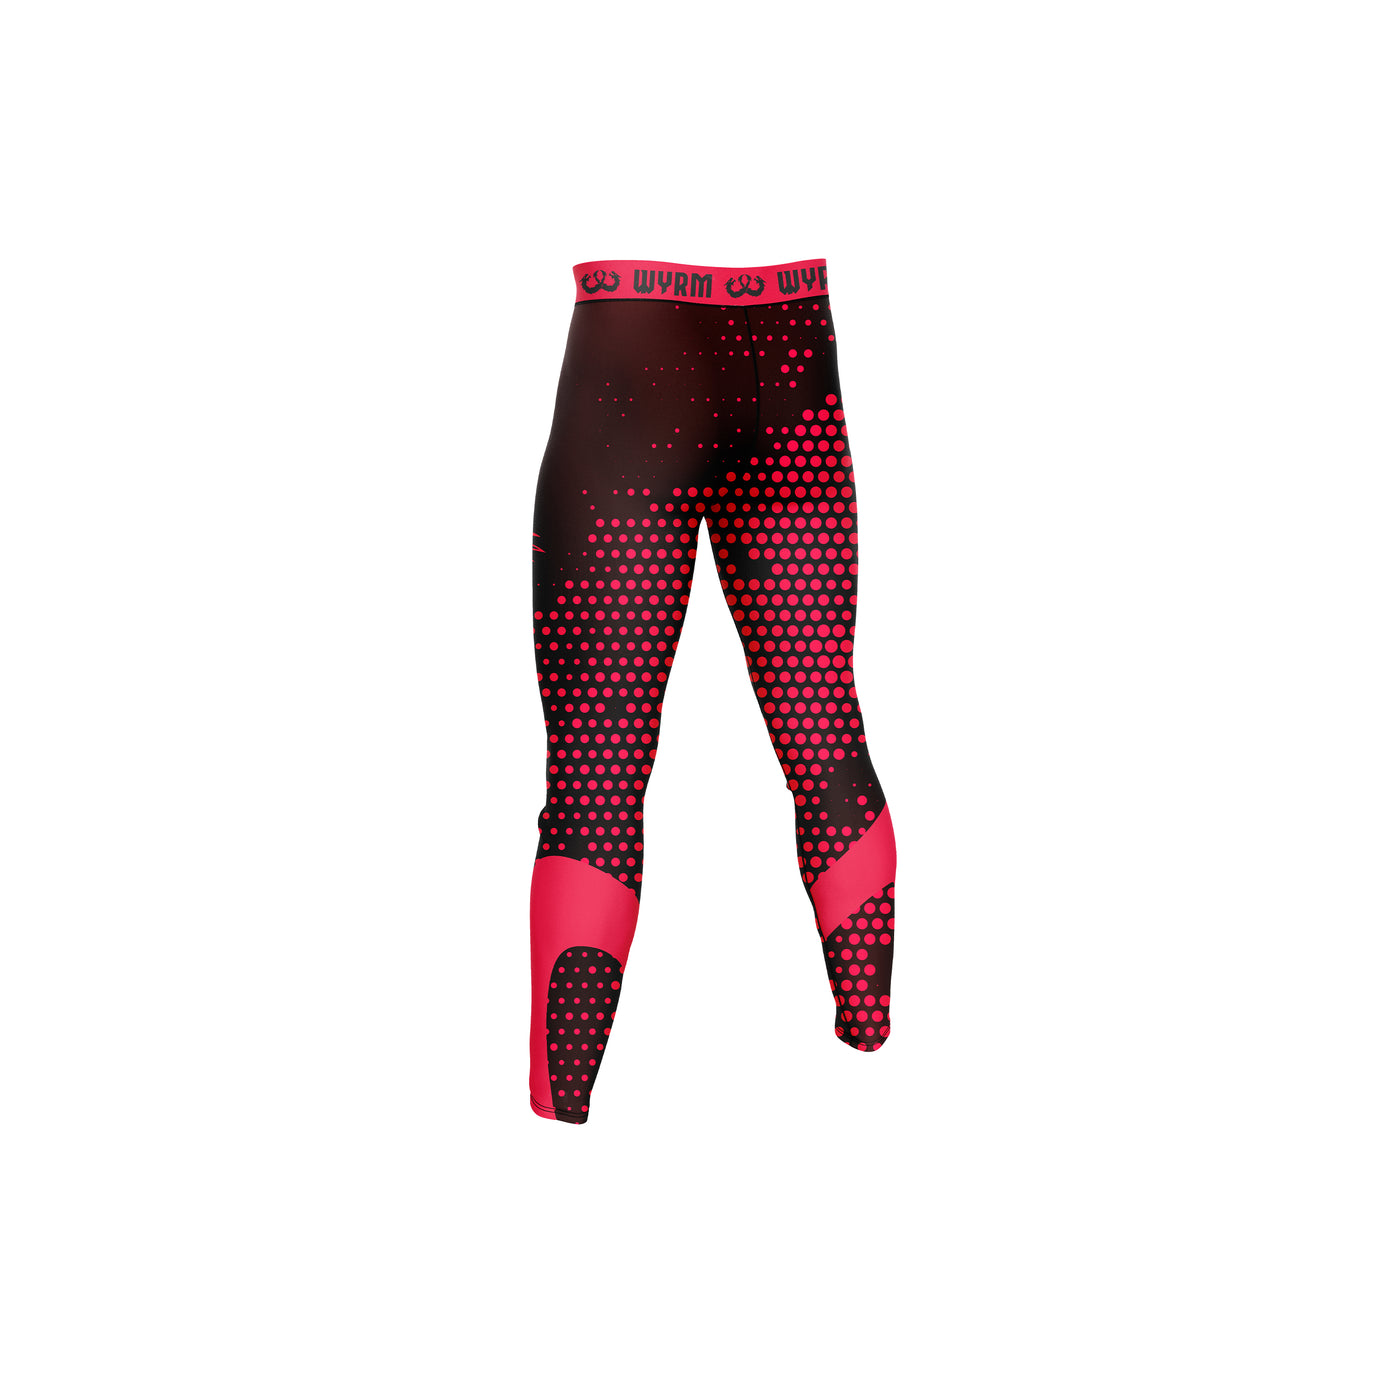 Wolfcrest Compression Spats